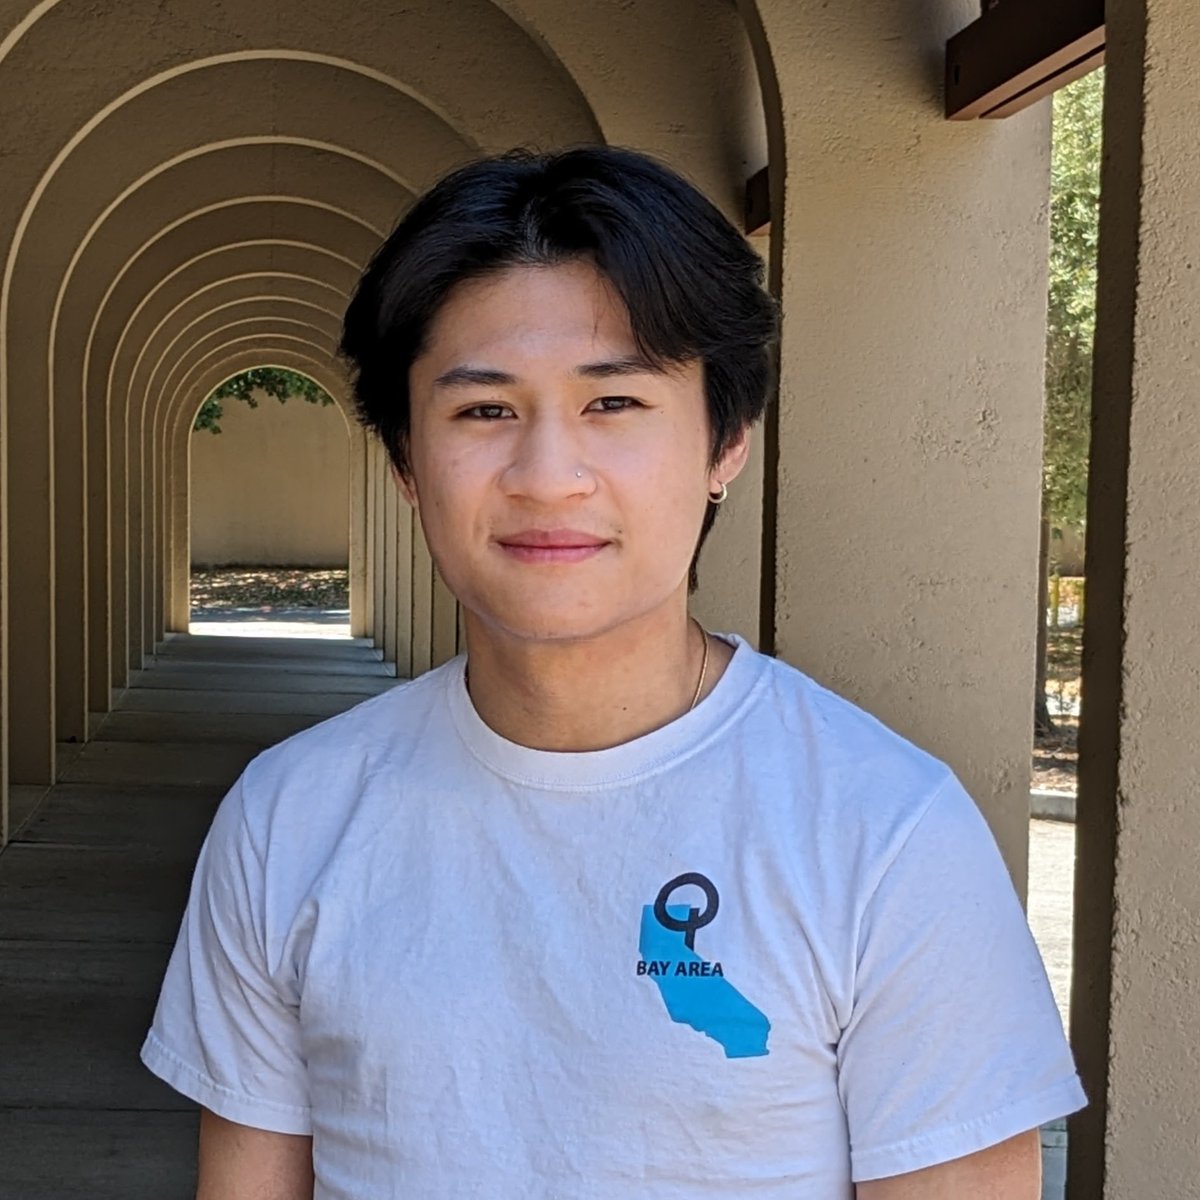 Meet Thomas Jia, a recipient of the #PresidentsAward! He earned associate degrees in Business Administration and Economics and is transferring to @UCBerkeley for Economics. A former #fosteryouth, Thomas found support and resources at @DeAnzaGSP. Read more: bit.ly/44k12vk